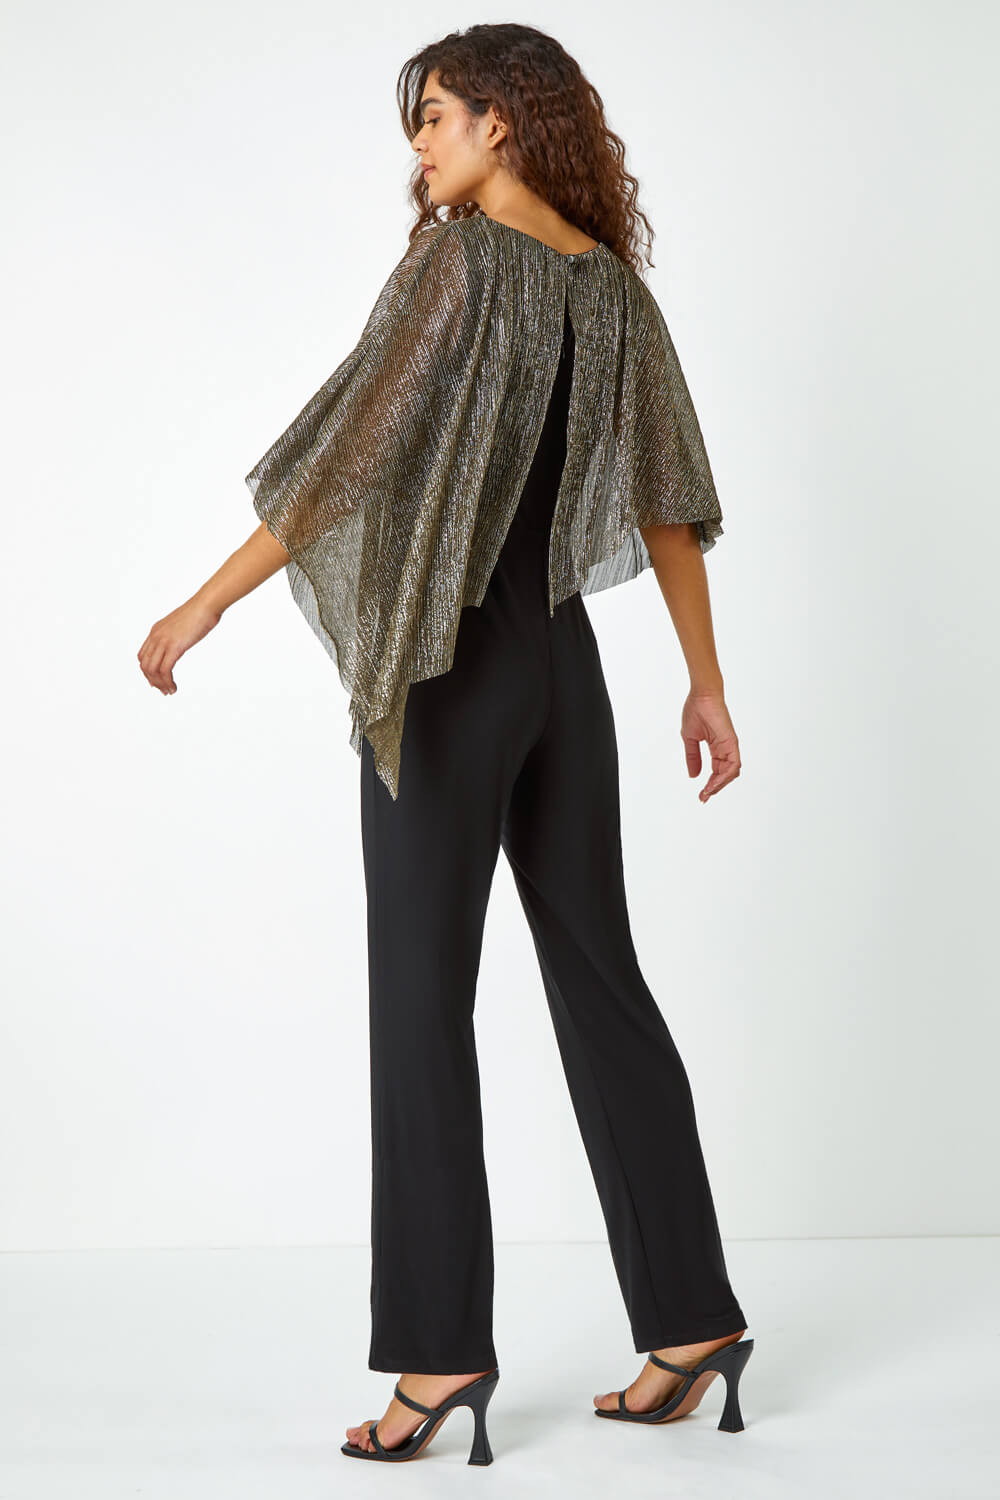 Gold Metallic Overlay Stretch Jumpsuit, Image 3 of 5